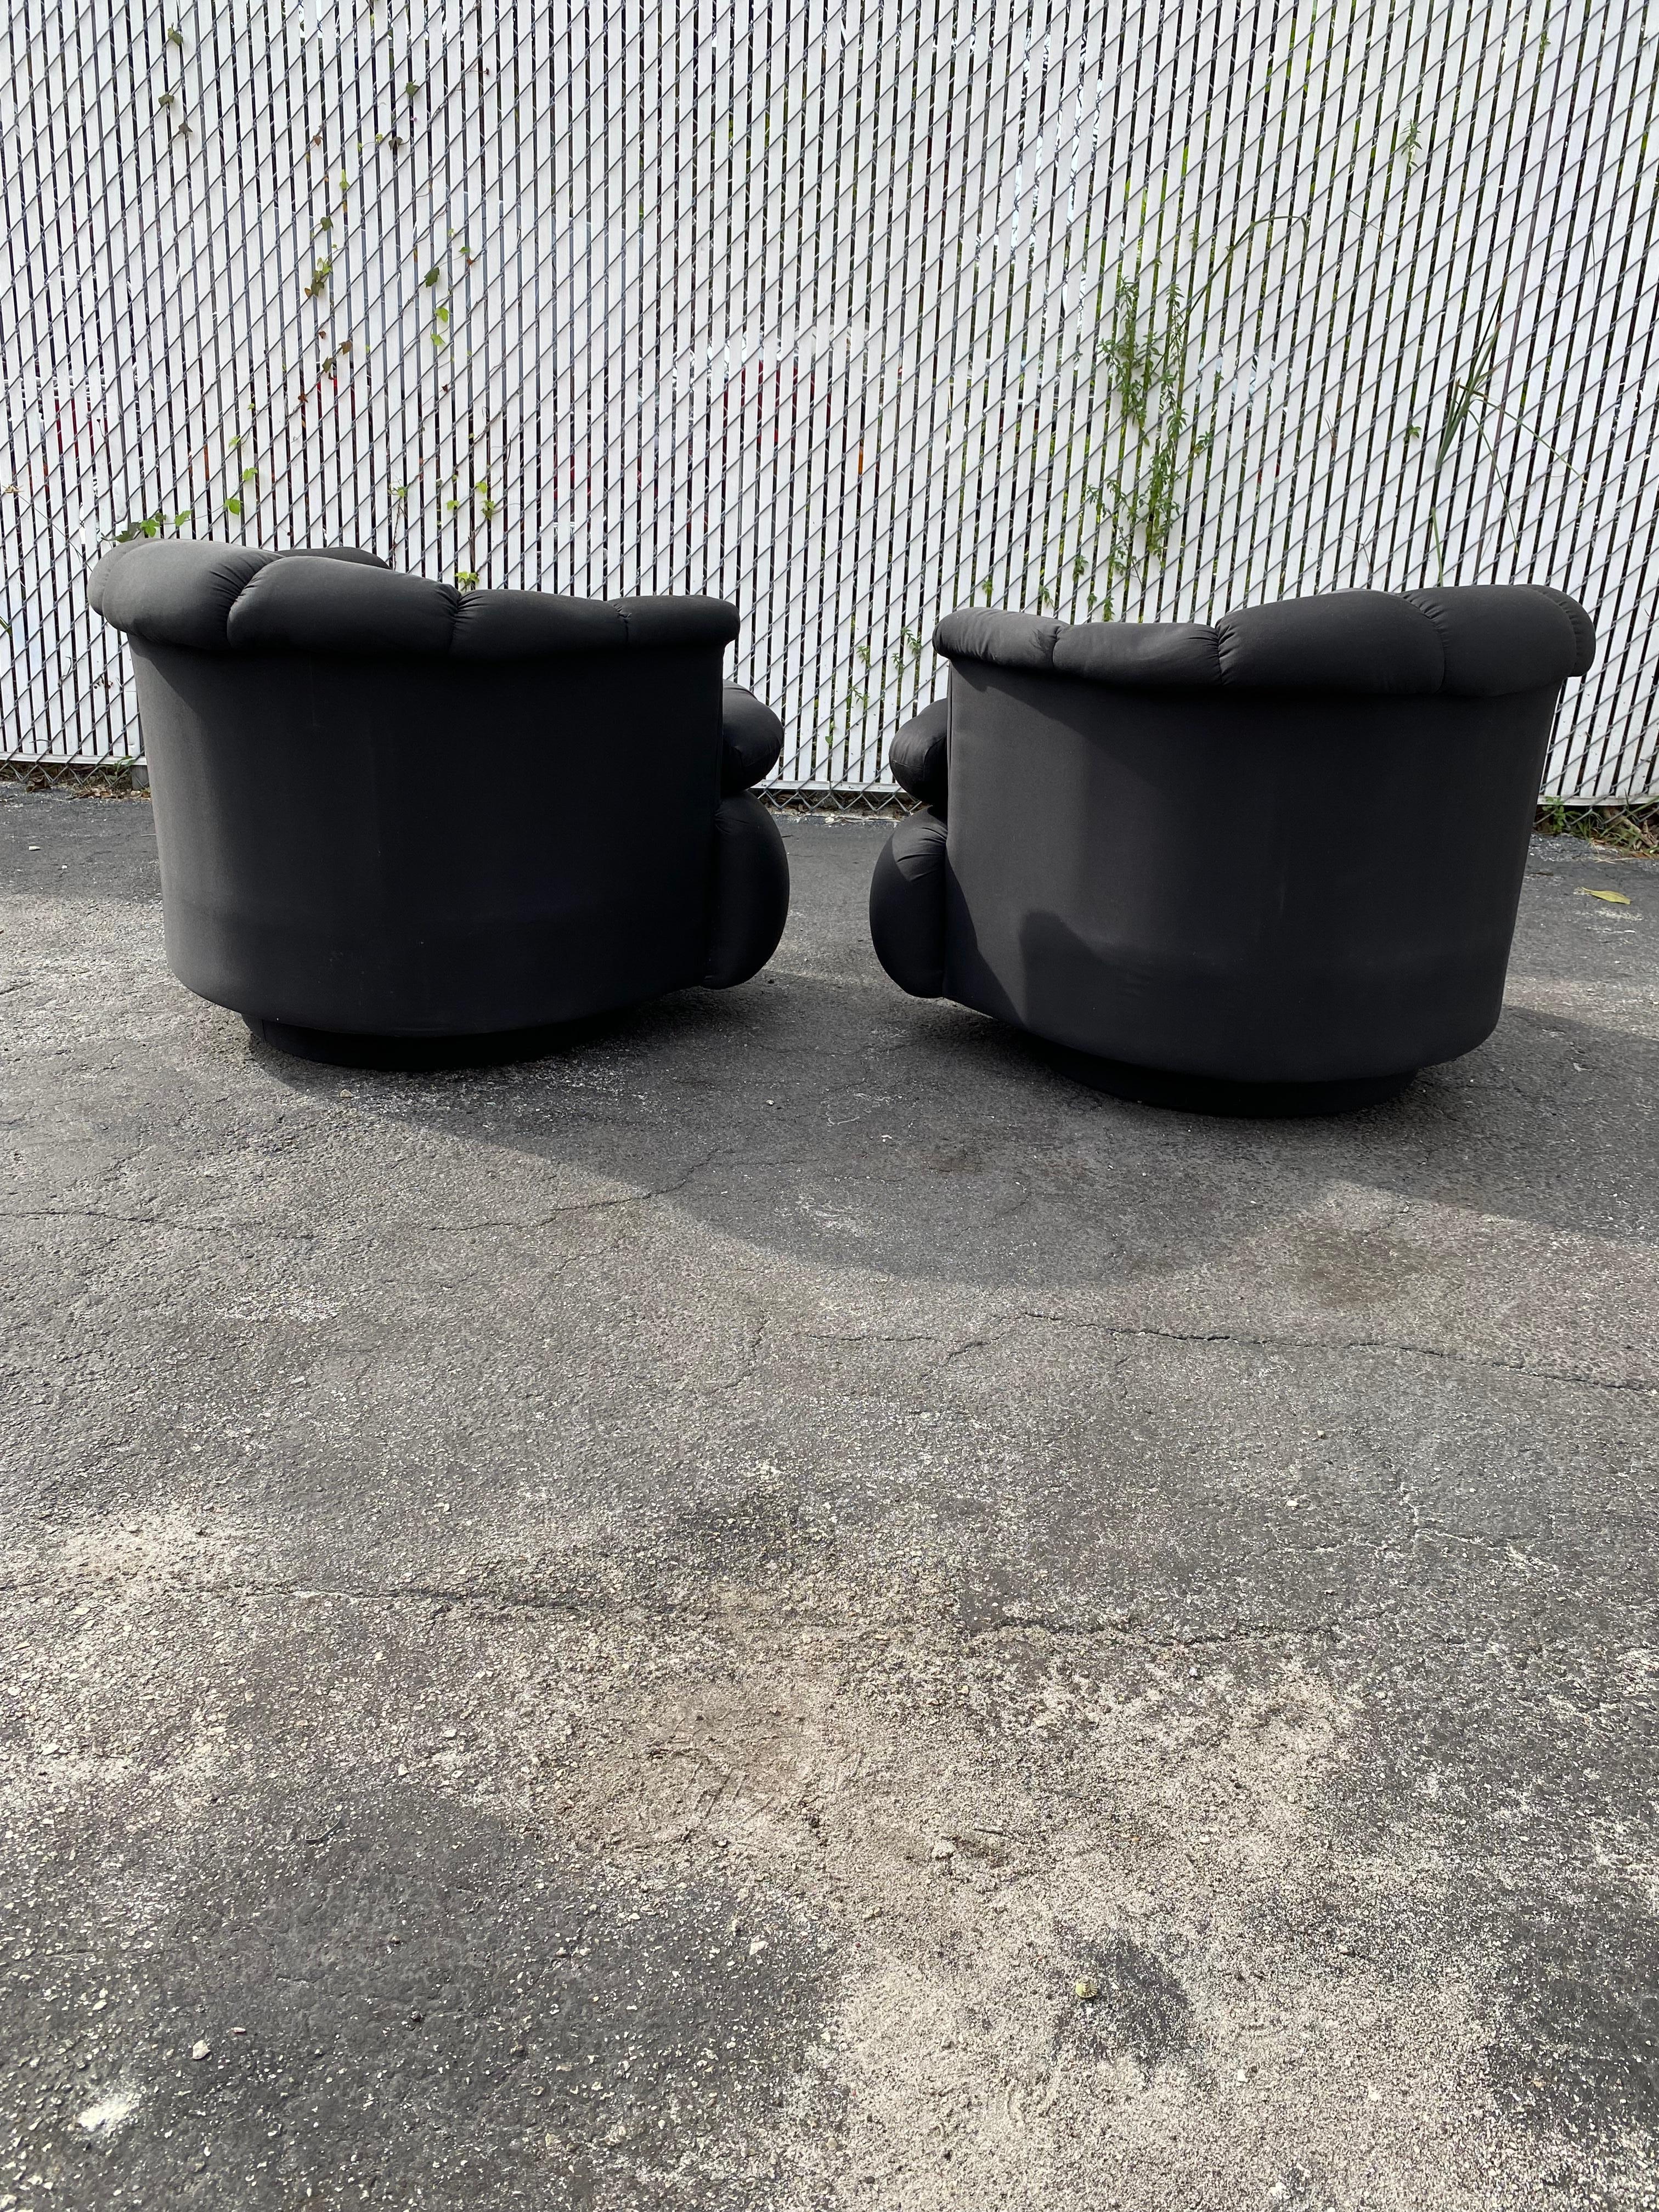 1980s Croissant Tufted Channeled Swivel Chairs, Set of 2 In Good Condition For Sale In Fort Lauderdale, FL